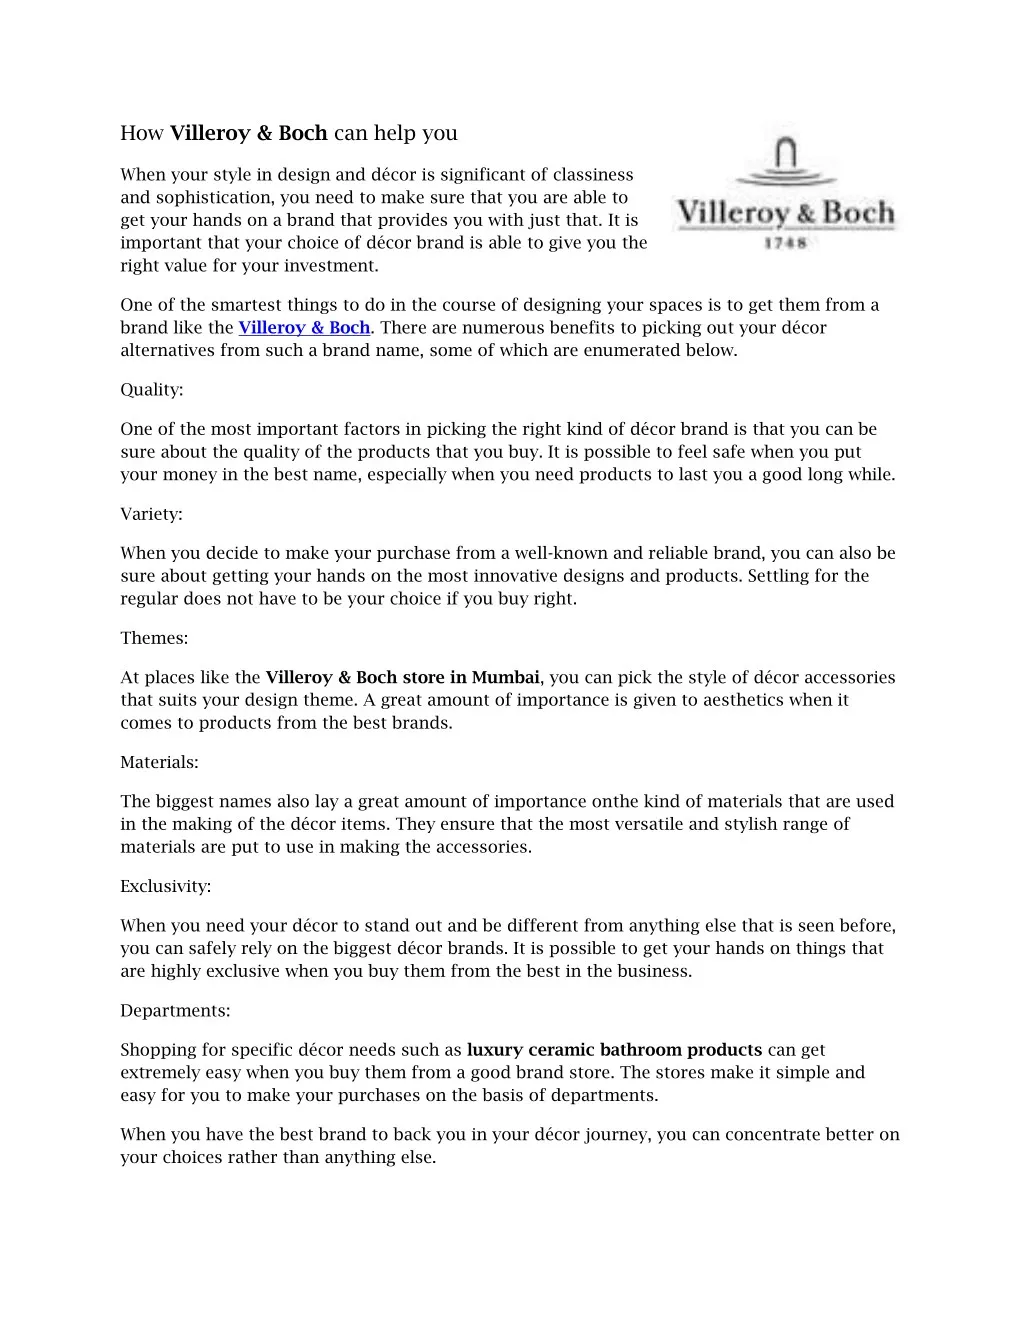 how villeroy boch can help you